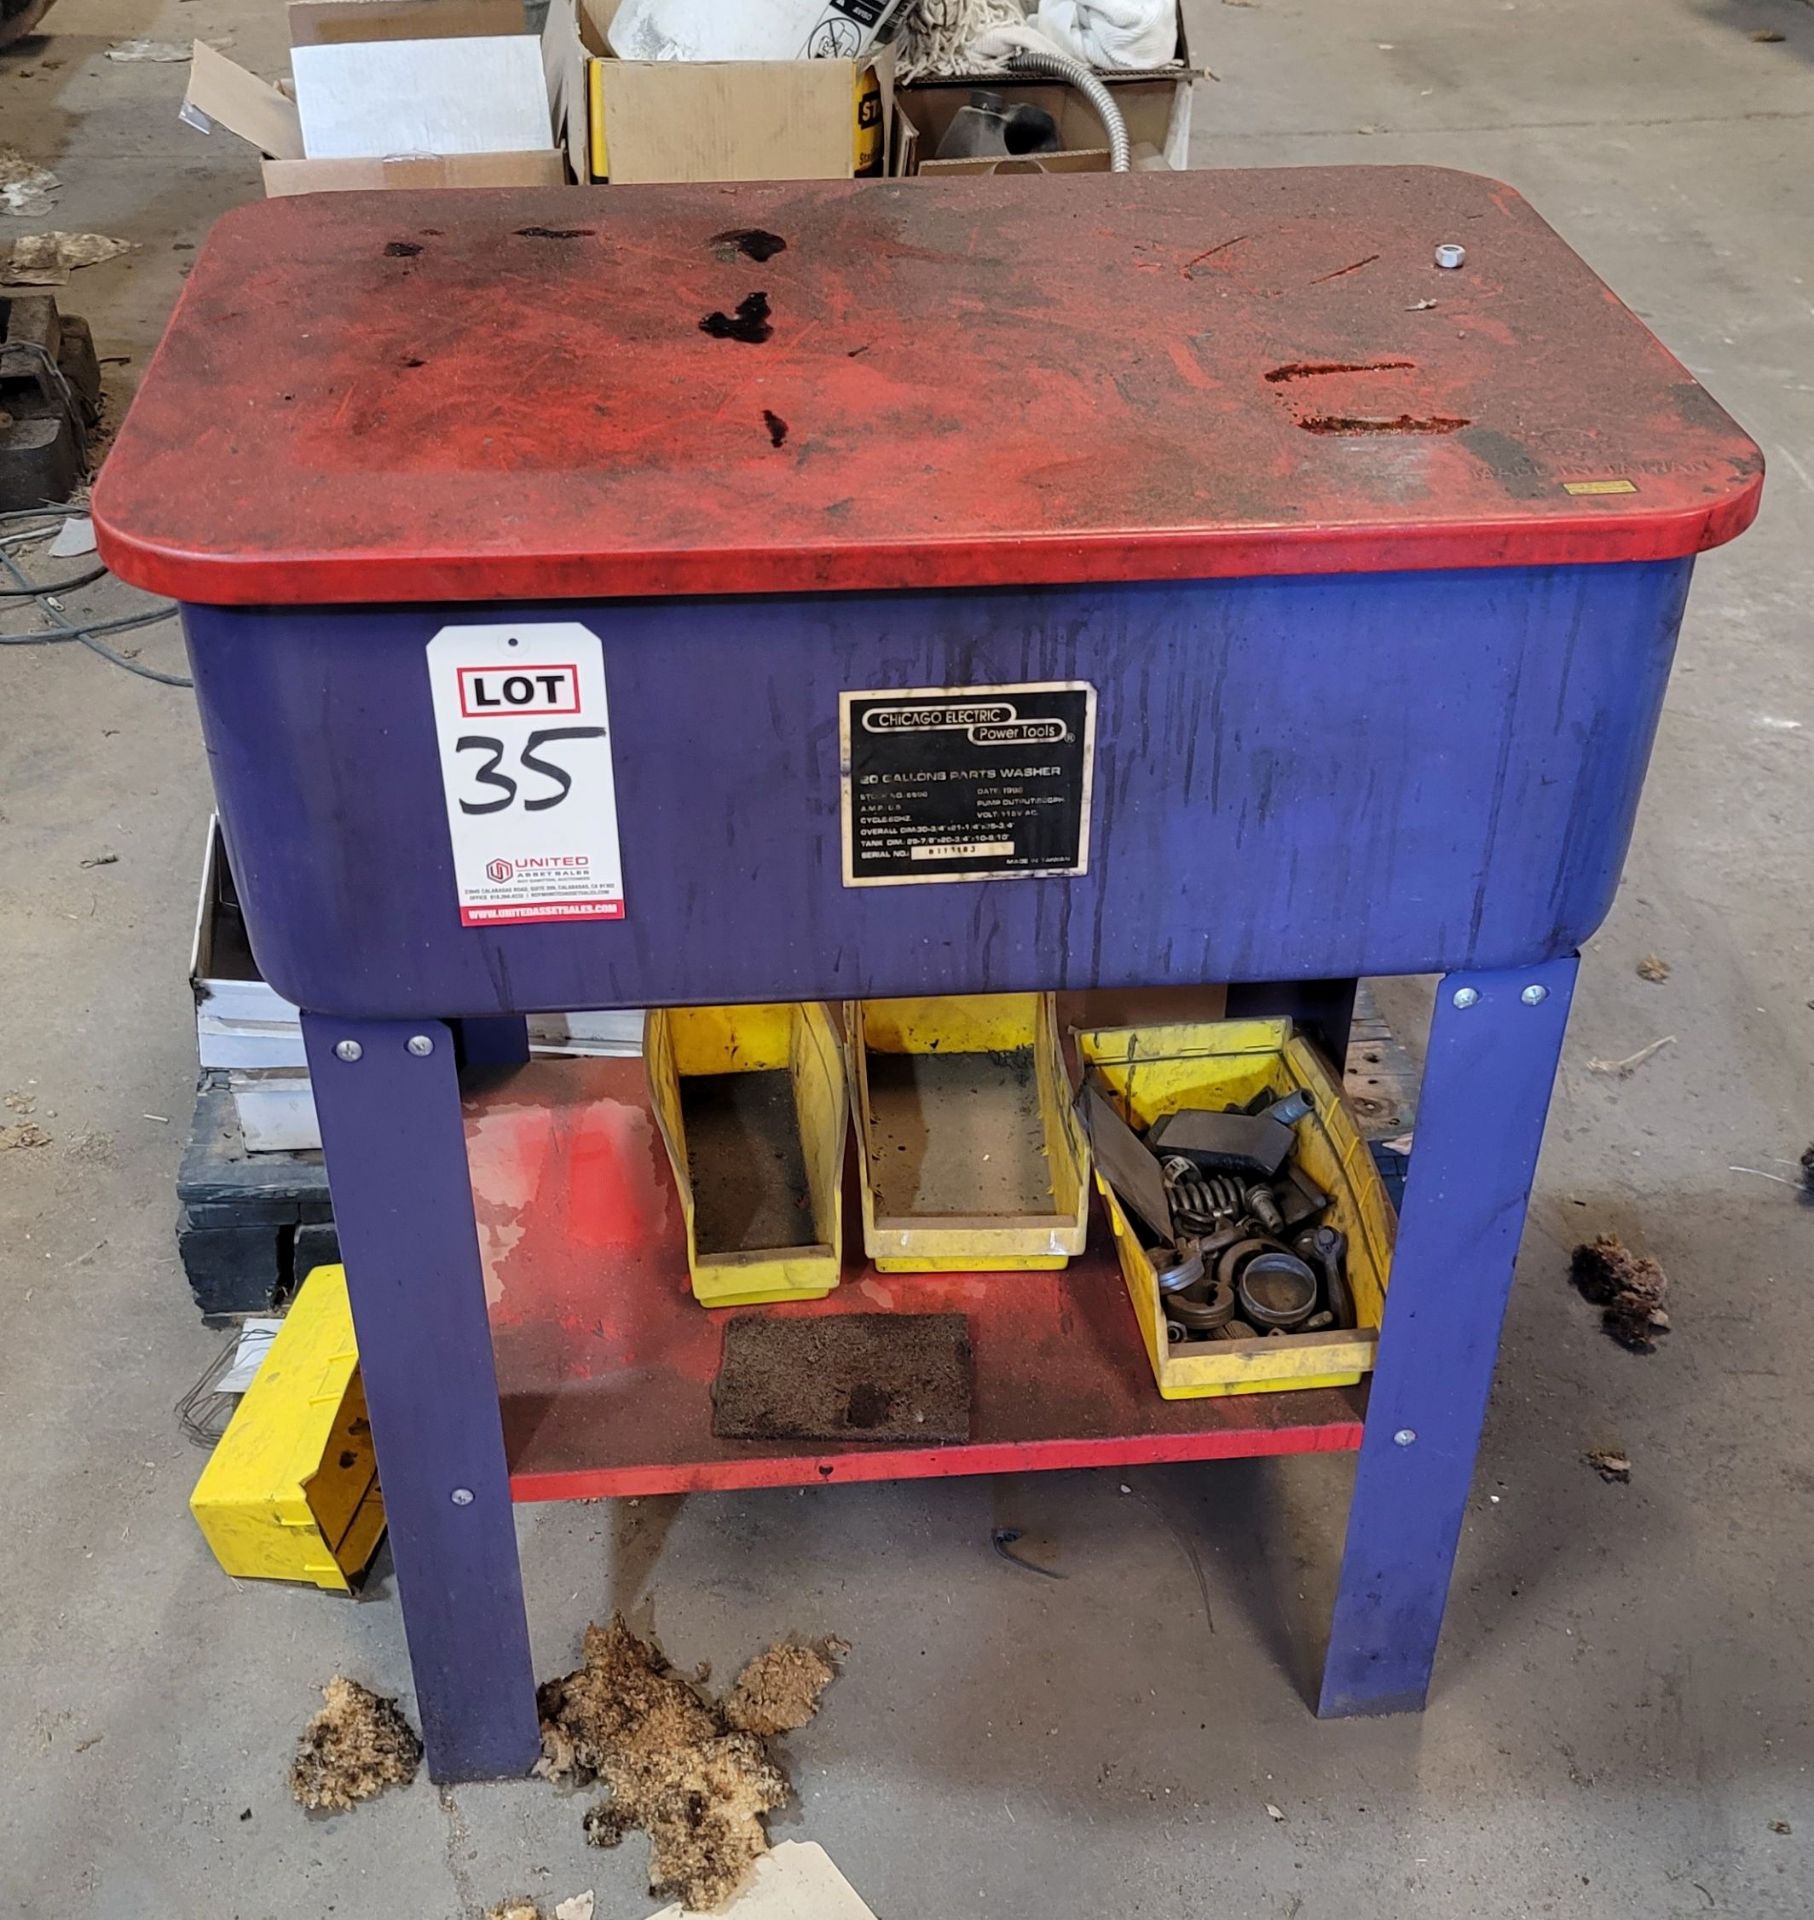 CHICAGO ELECTRIC 20-GALLON PARTS WASHER, STOCK NO. 6500, S/N 8111183